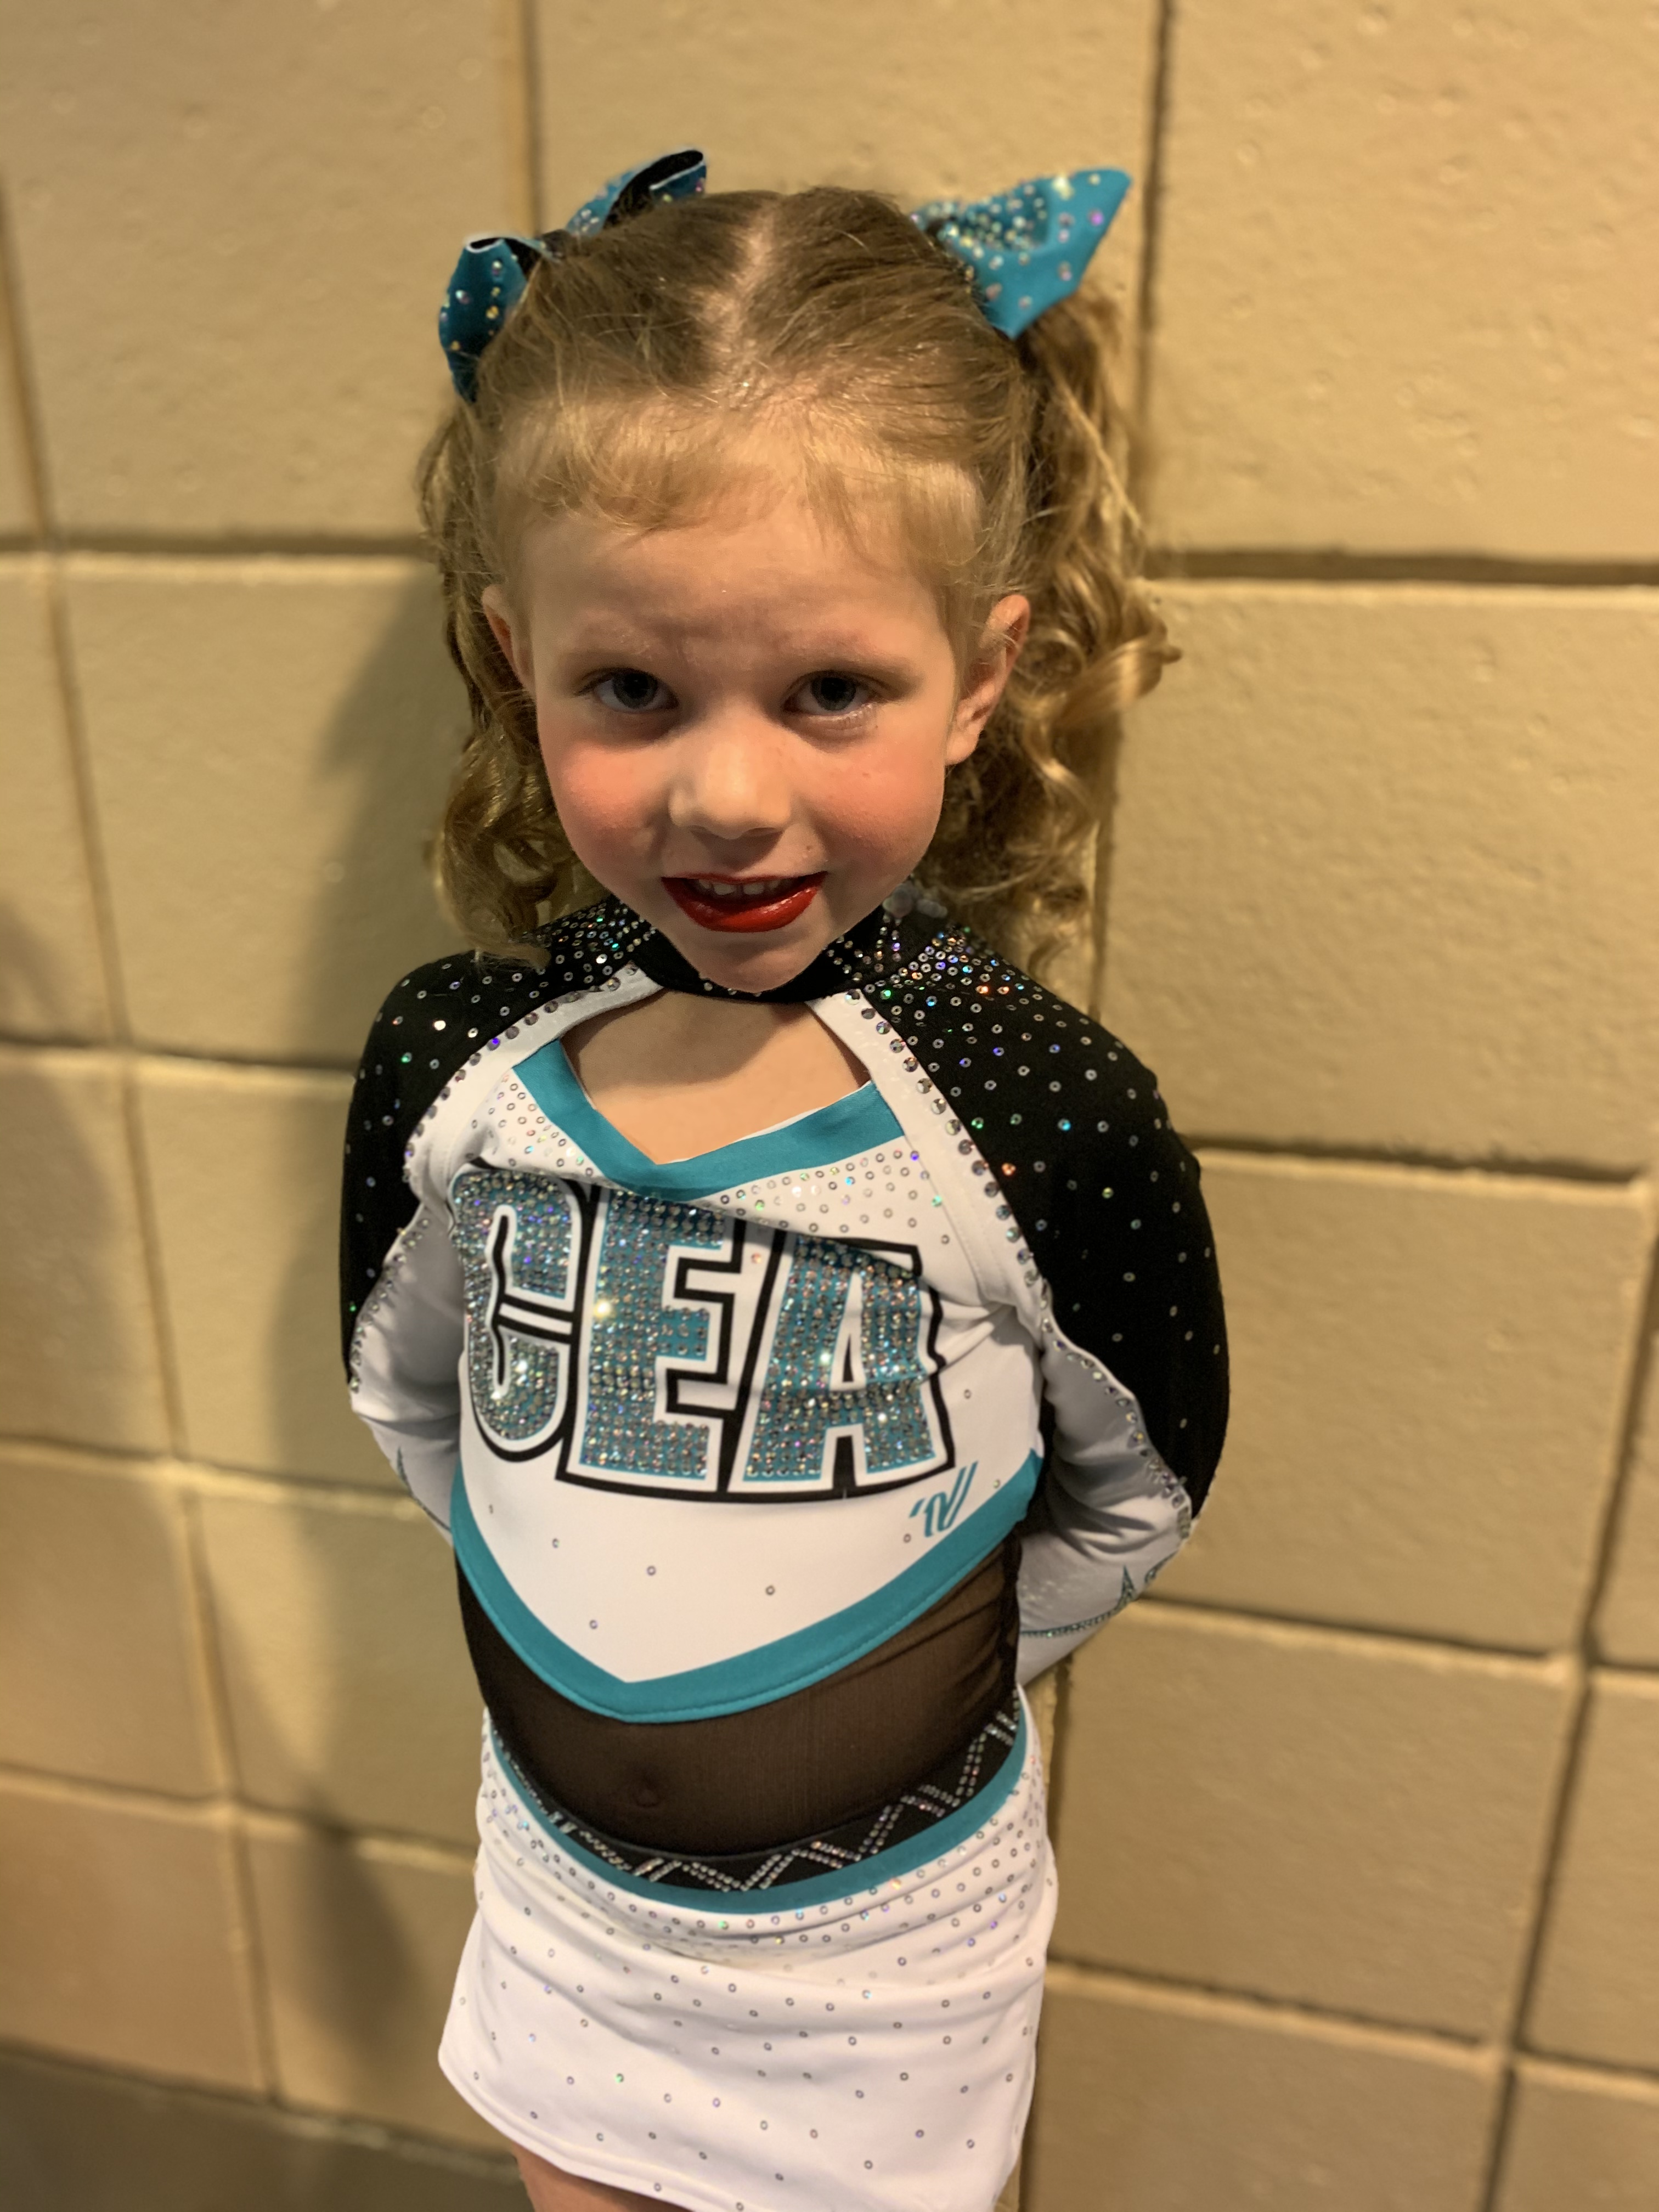 Quest Student makes Cheer Team 